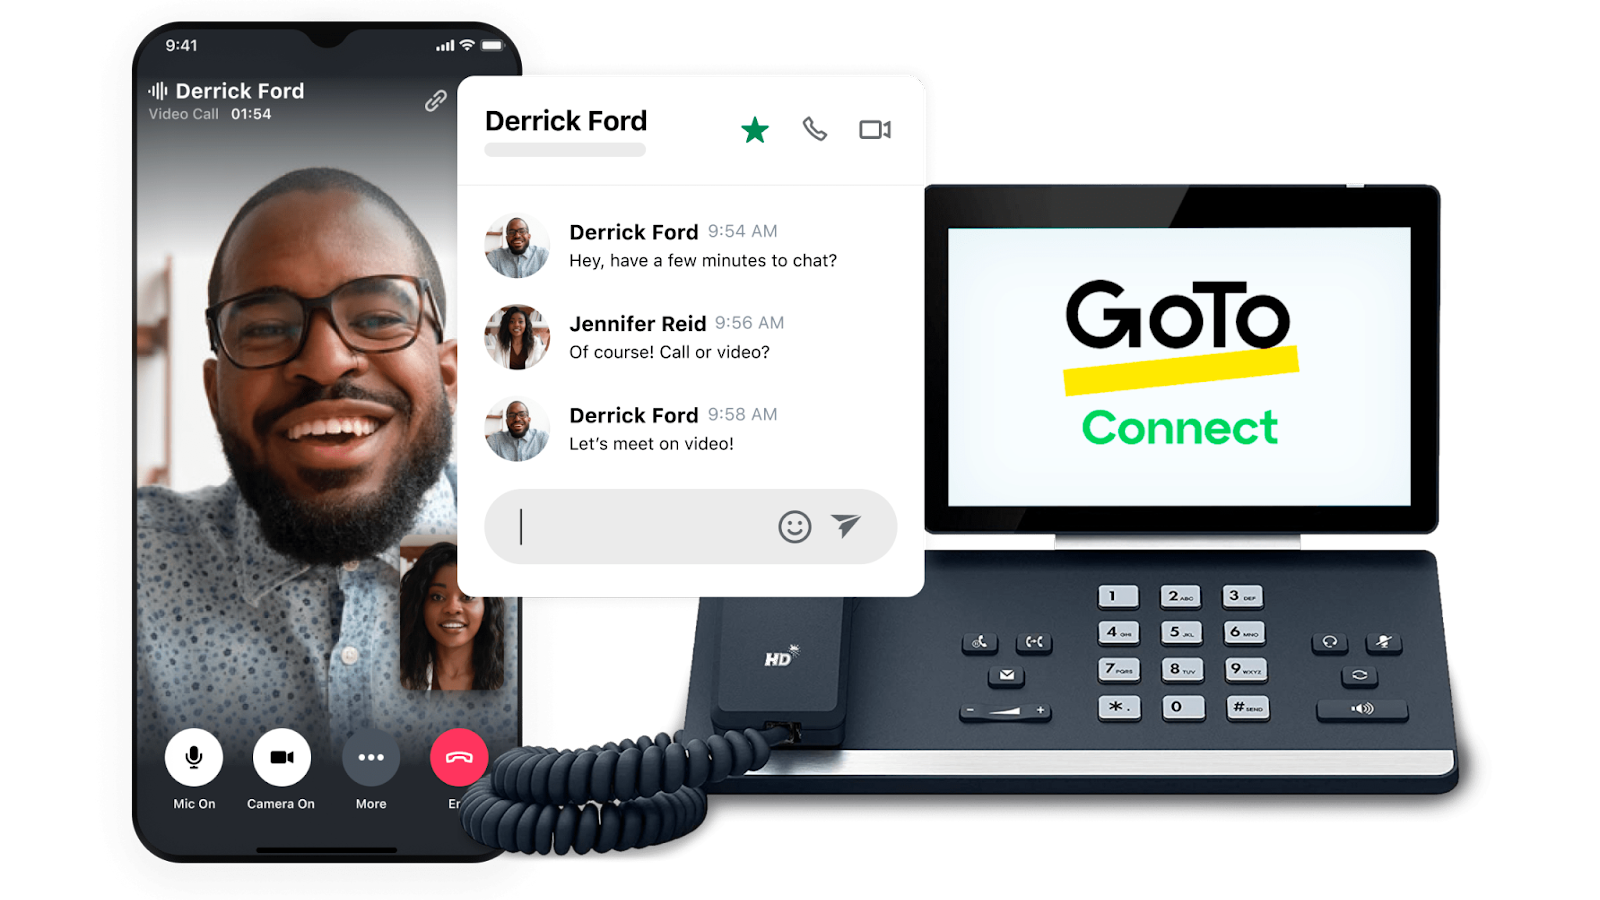 GoTo Connect business phone service